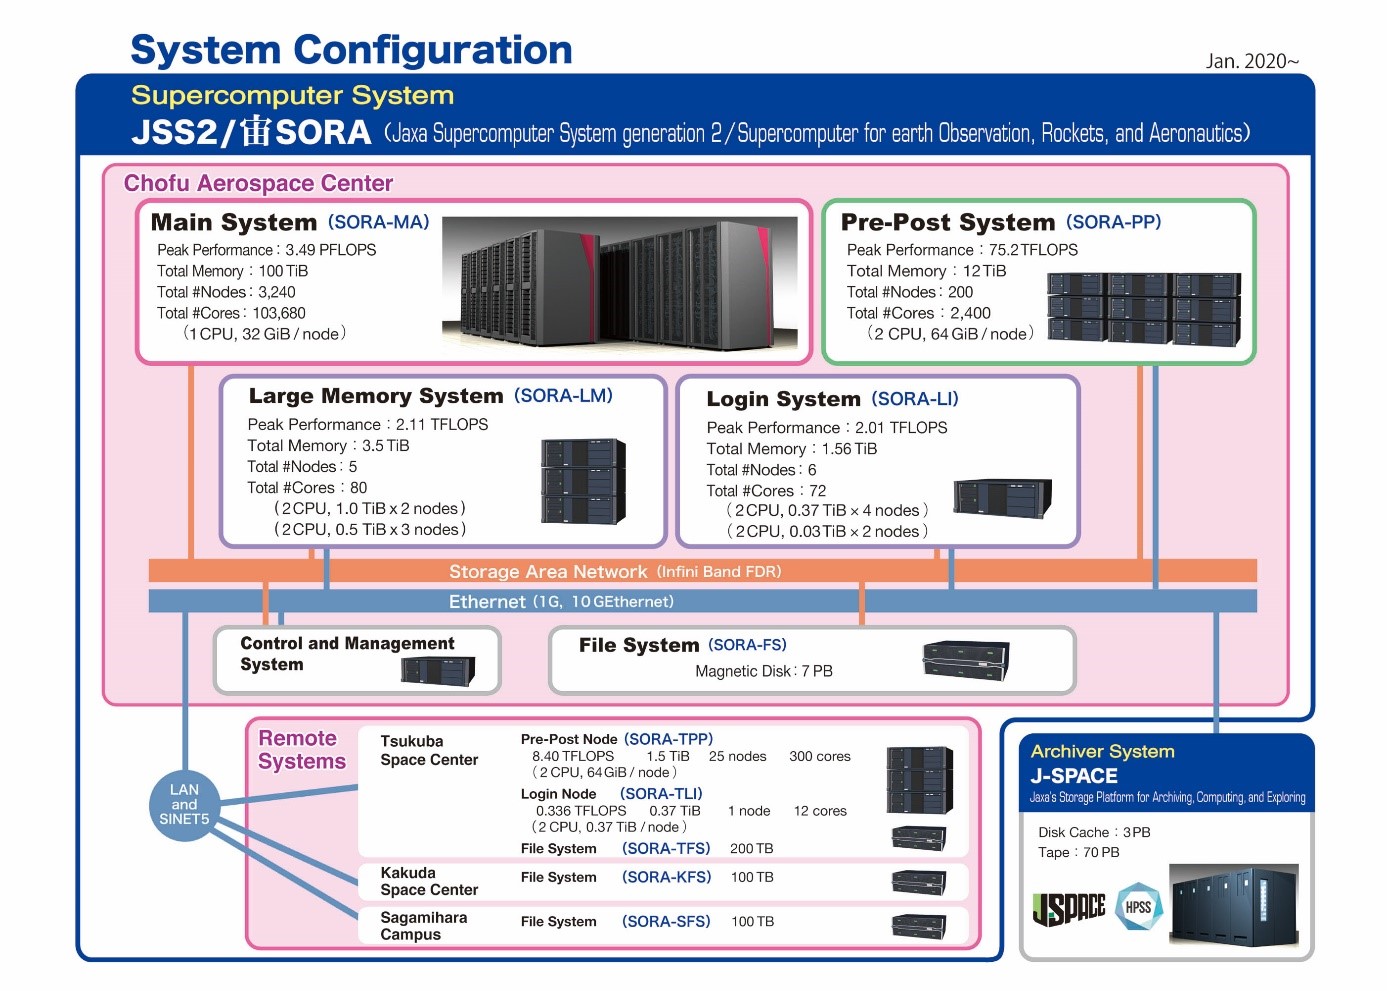 Configuration Overview of JSS2 System